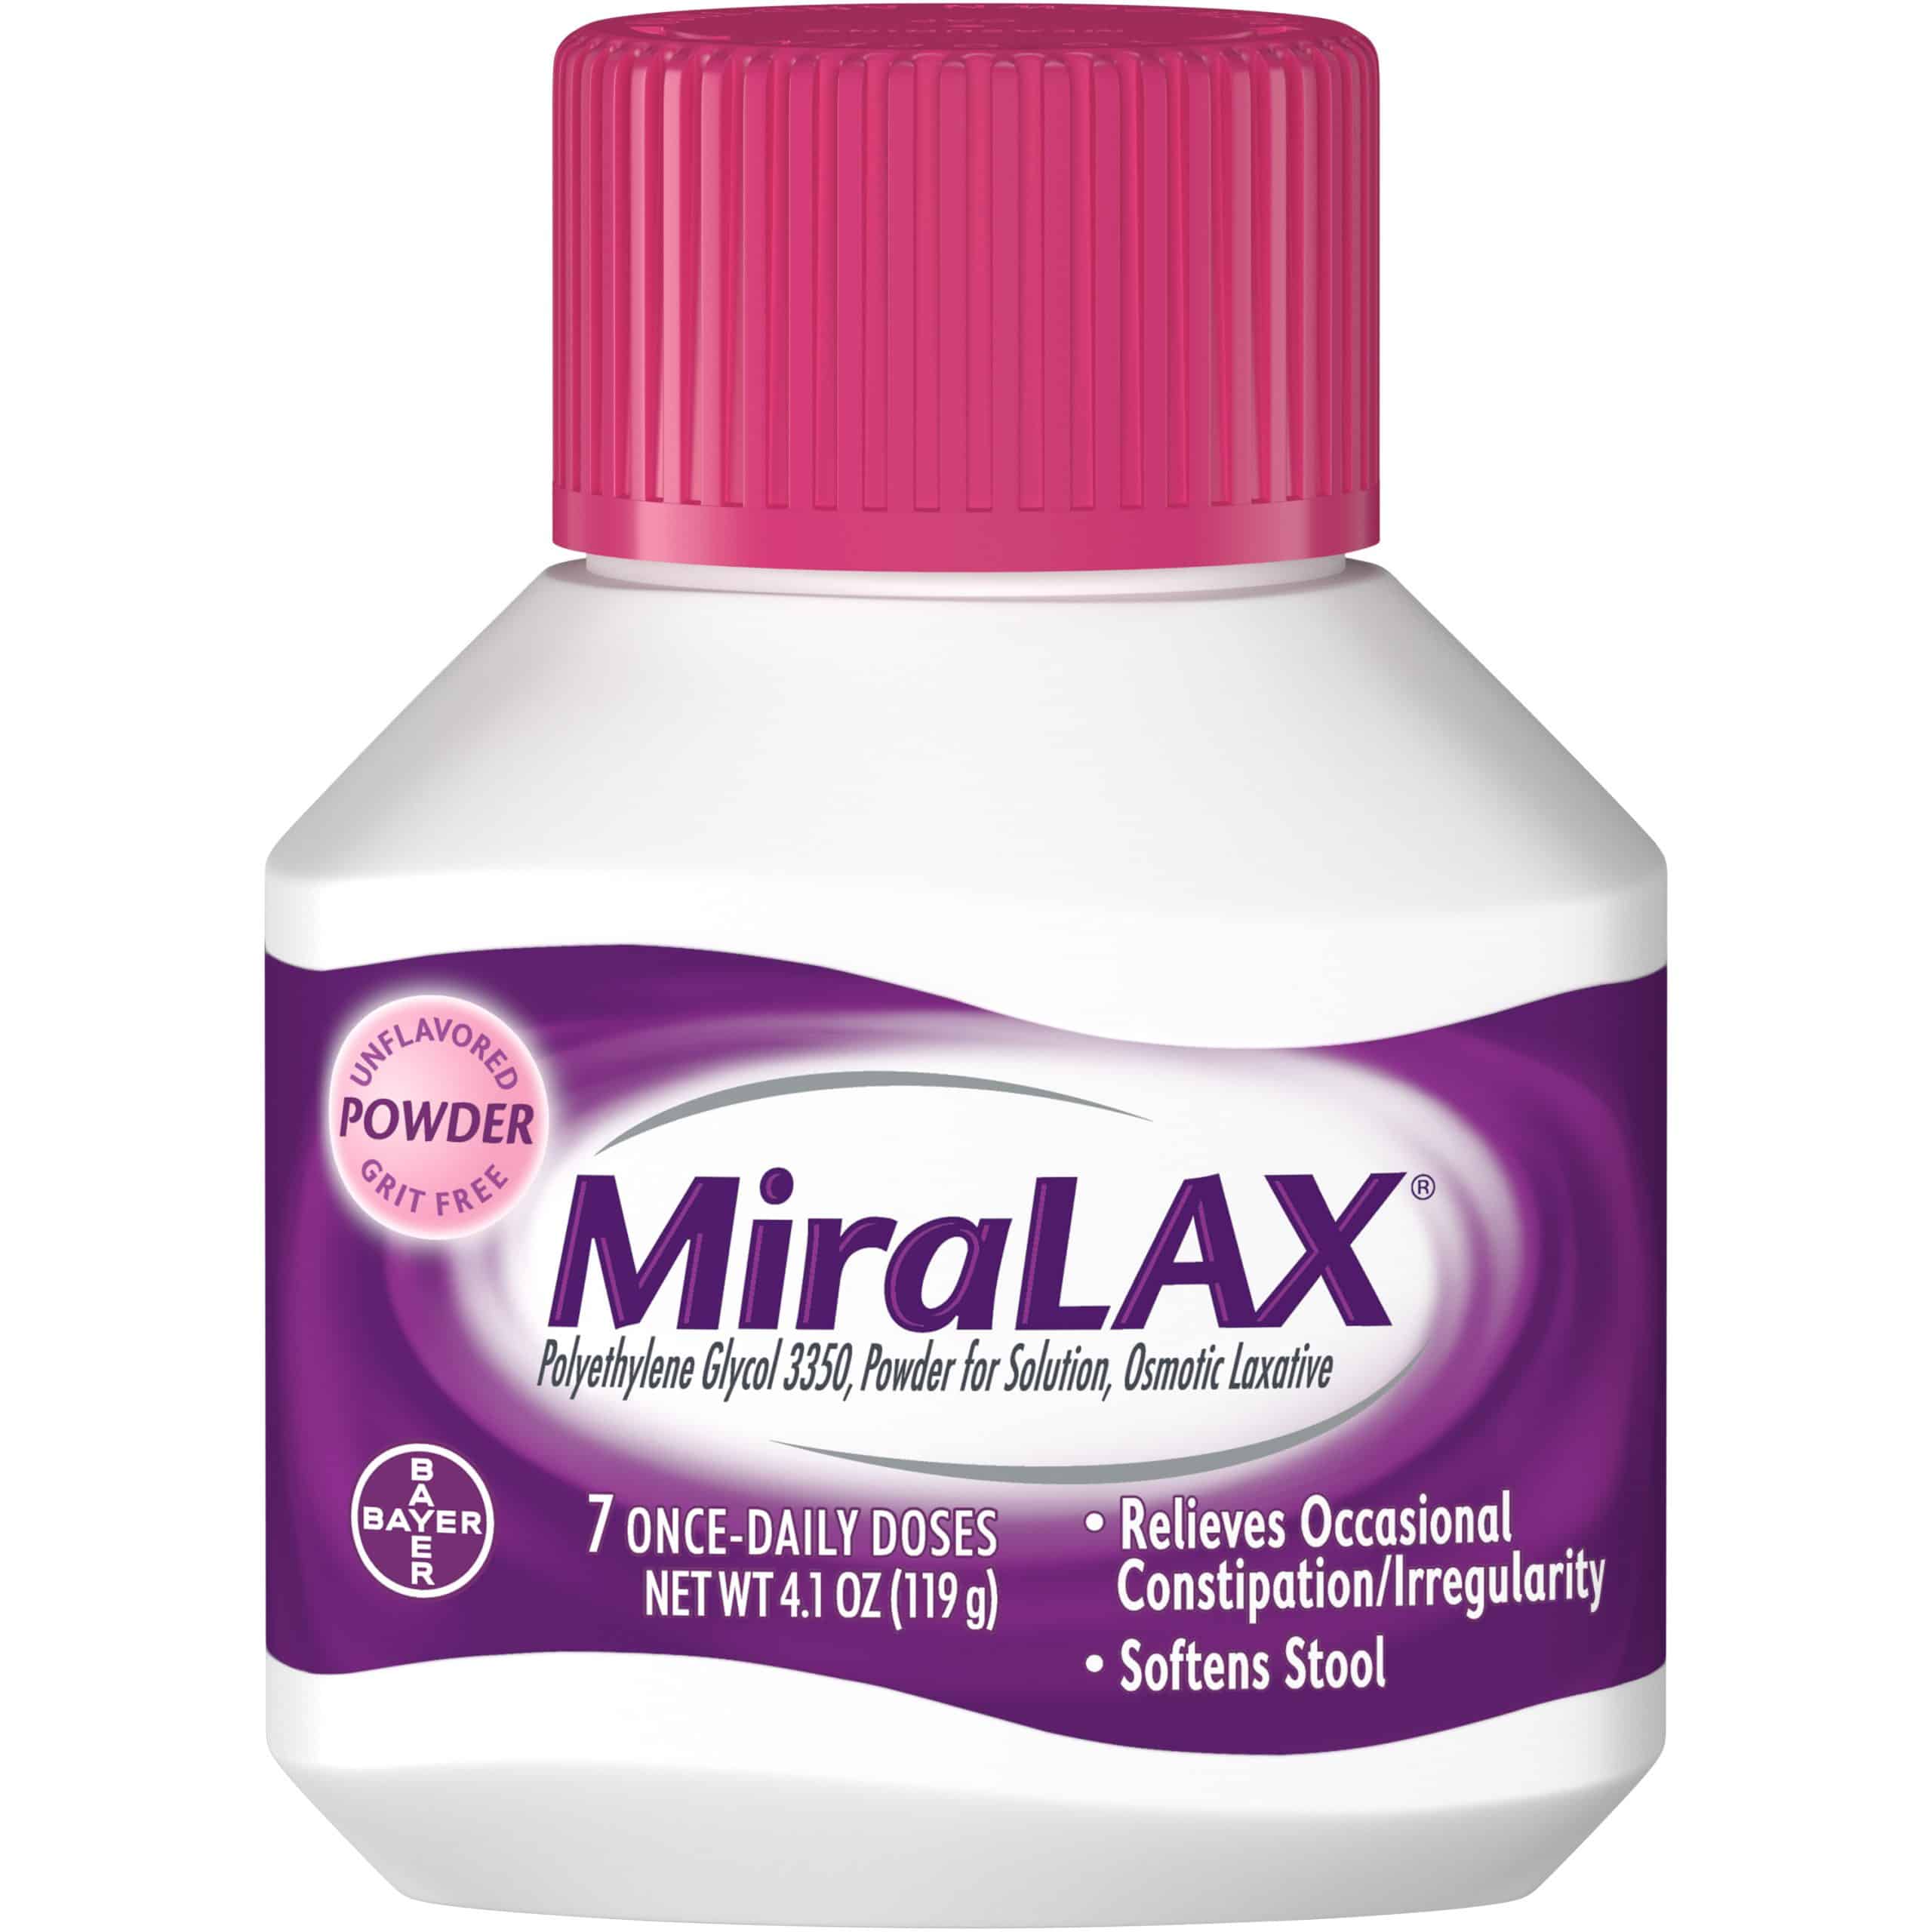 MiraLAX Laxative Powder for Gentle Constipation Relief, 7 Doses ...